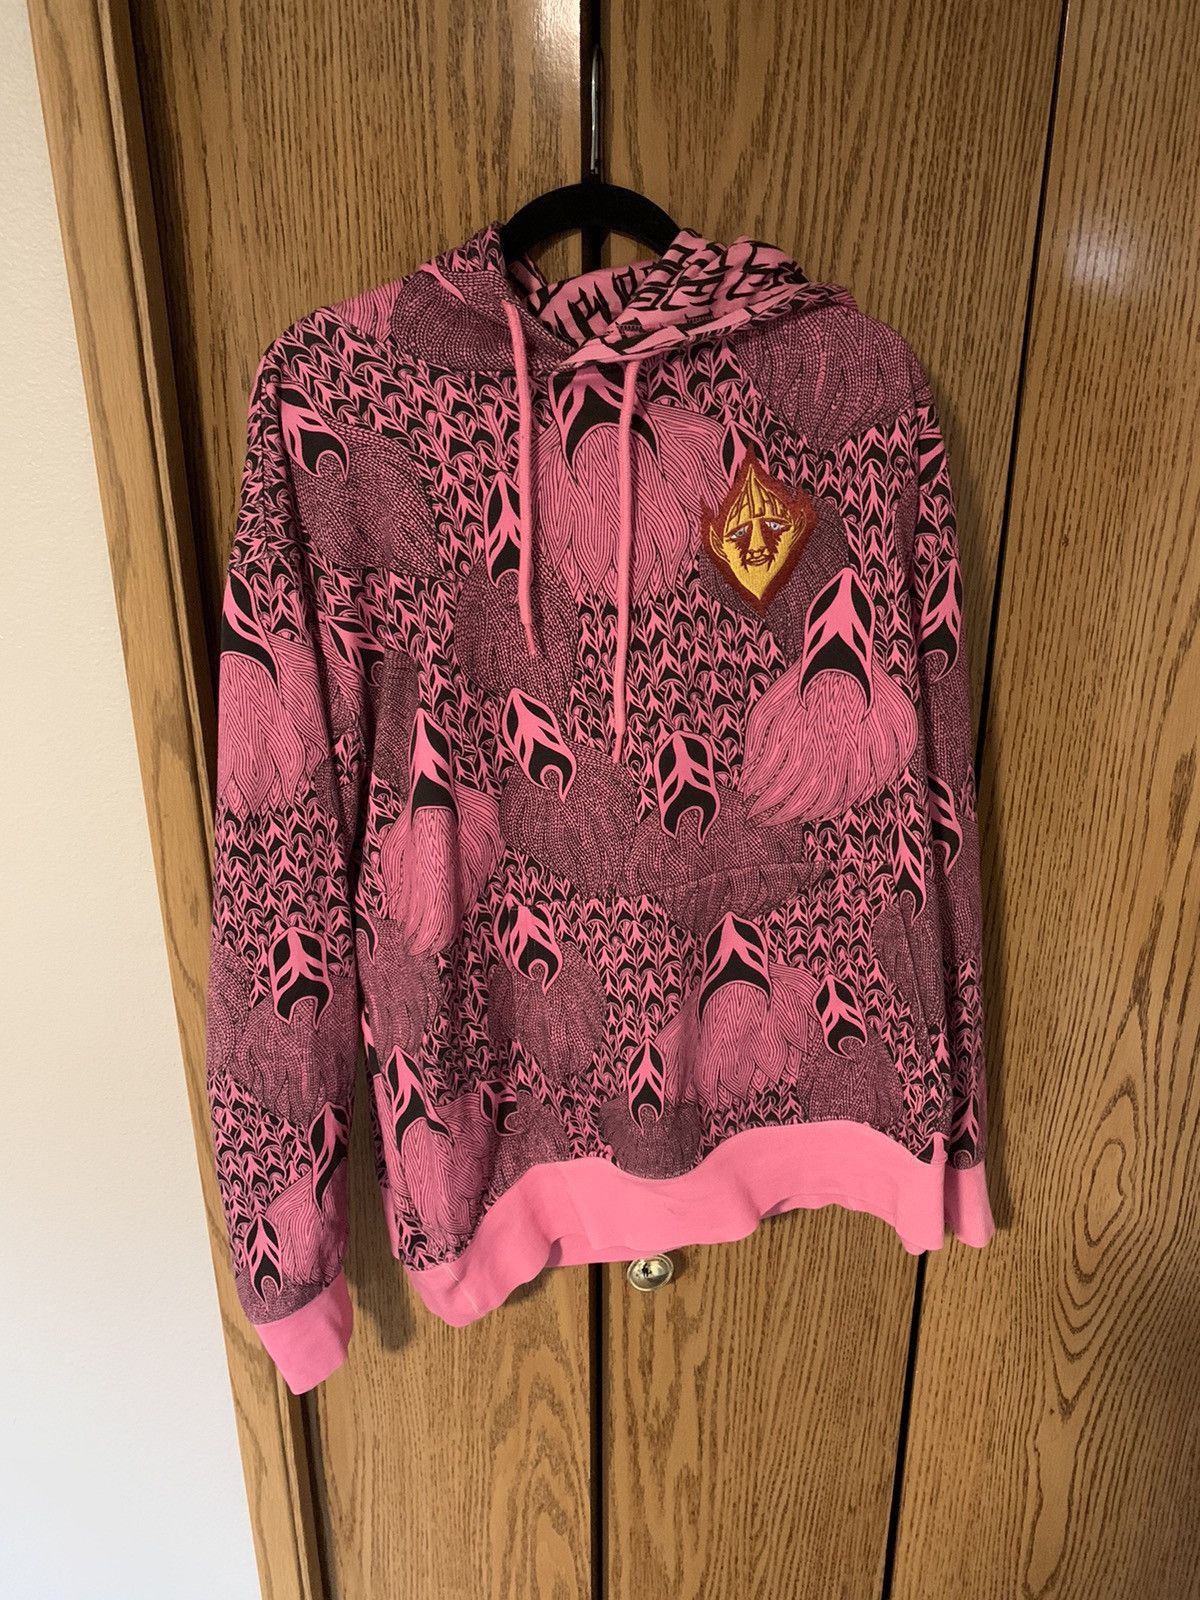 Pre-owned Palace X Suburban Bliss Hoodie Pink Xl